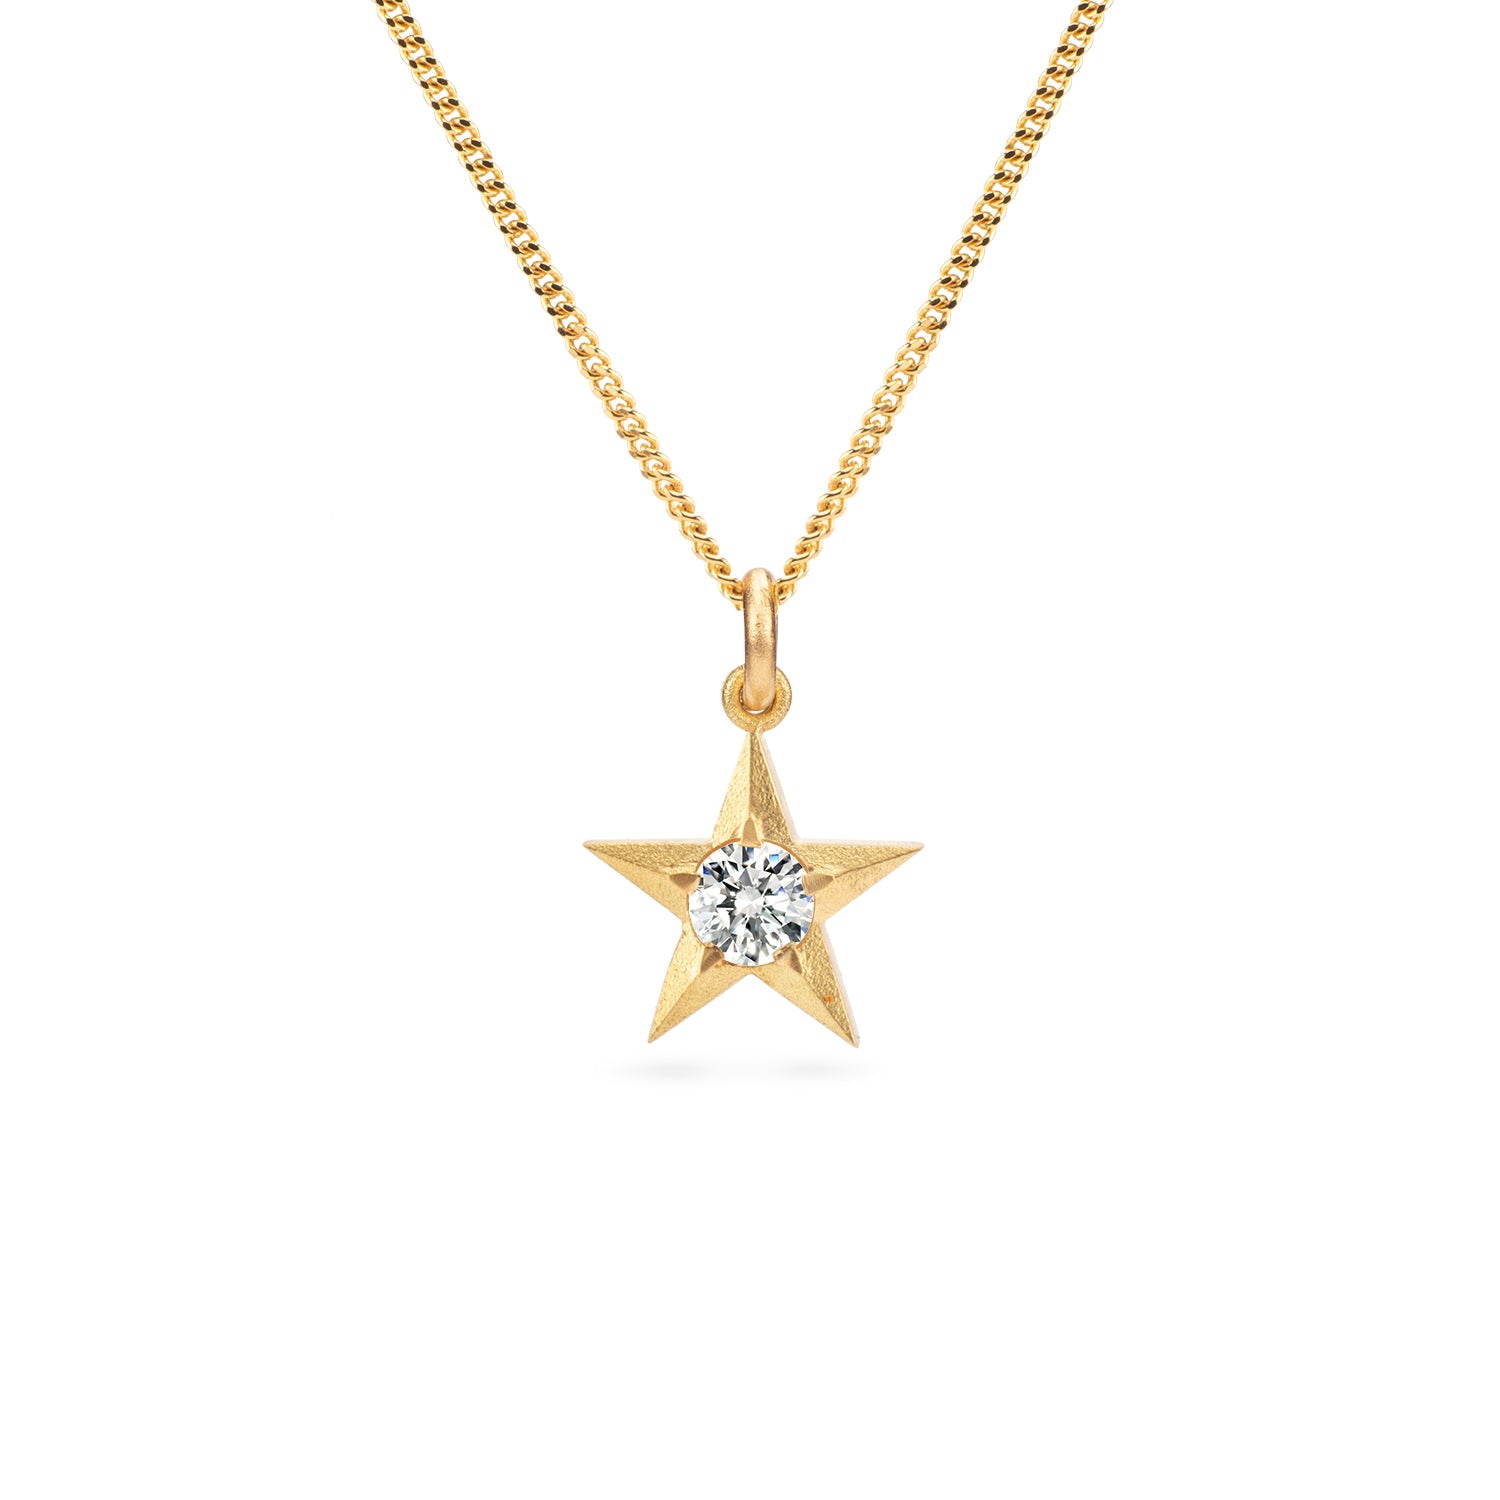 Stella 18ct Gold Star Necklace with Diamonds